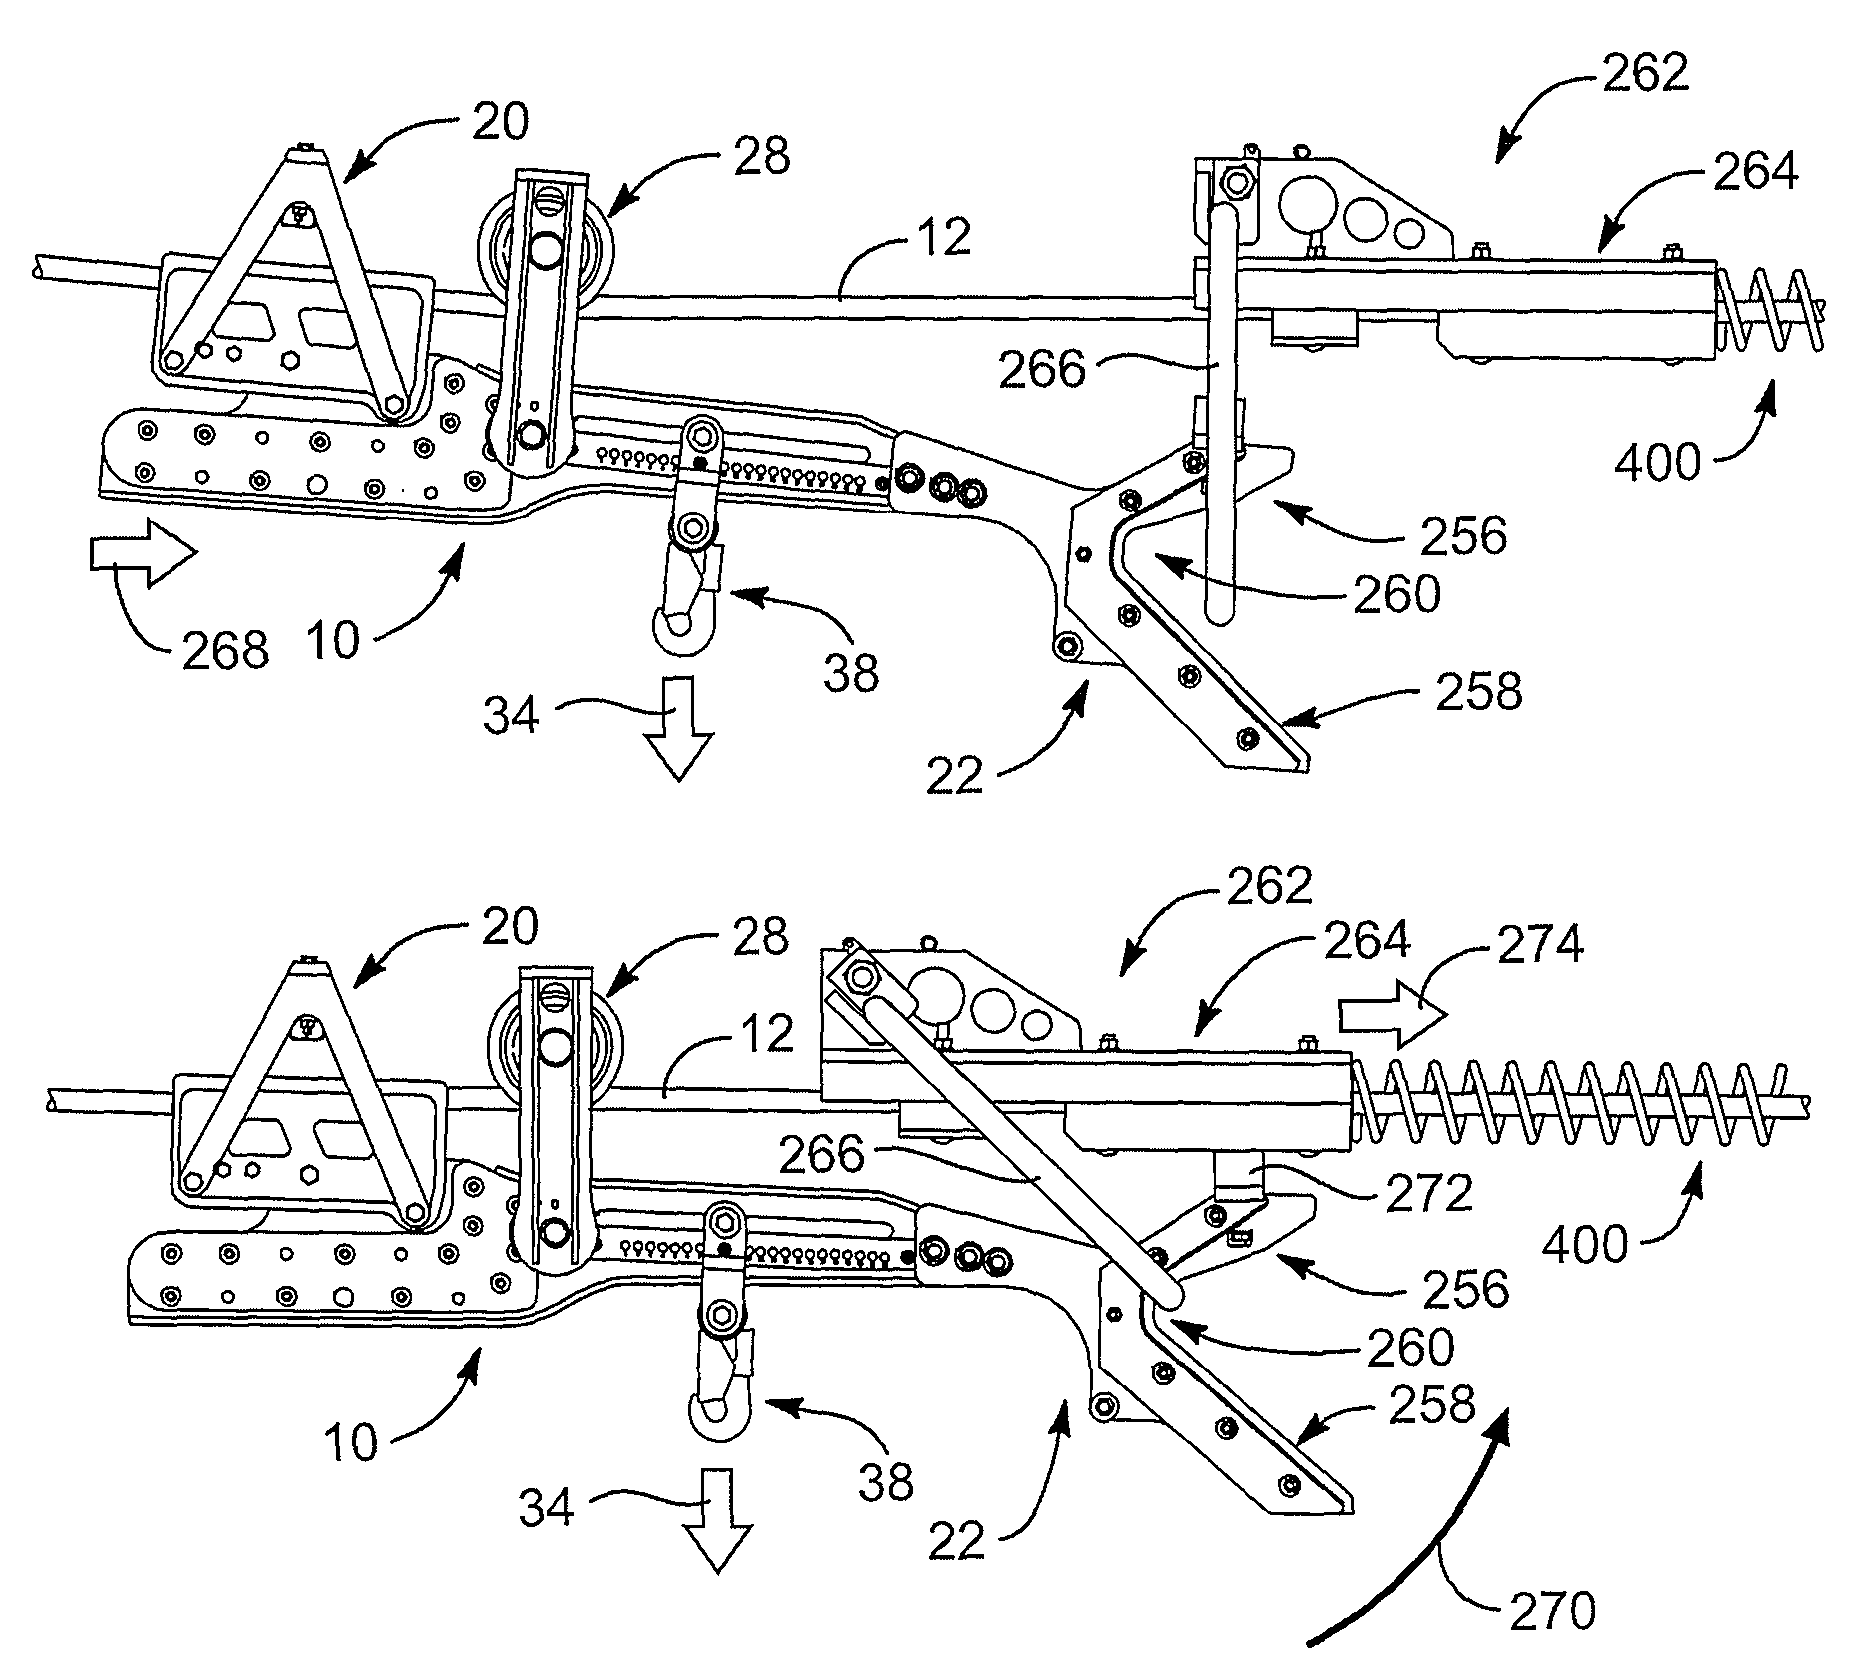 Load-minimizing, trolley arrester apparatus and method